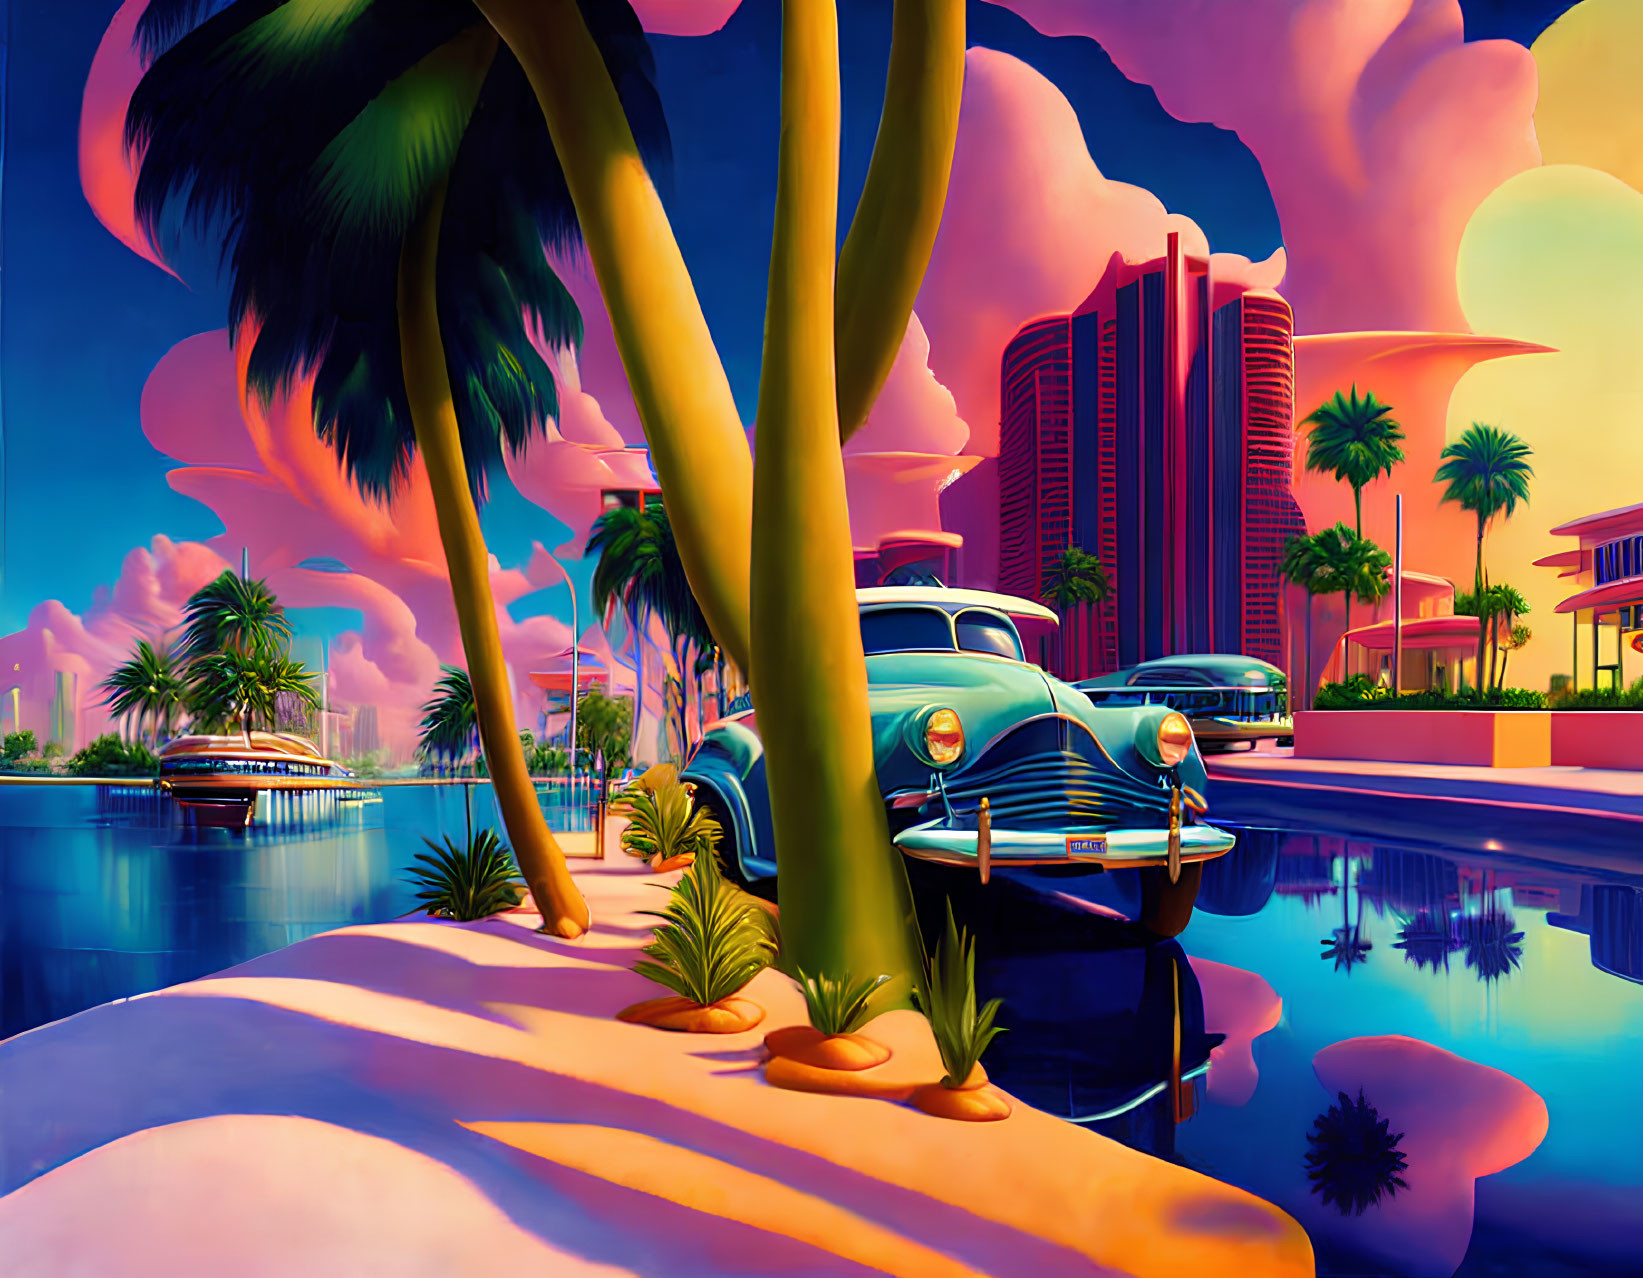 Retro-themed illustration of classic car and palm trees by waterfront